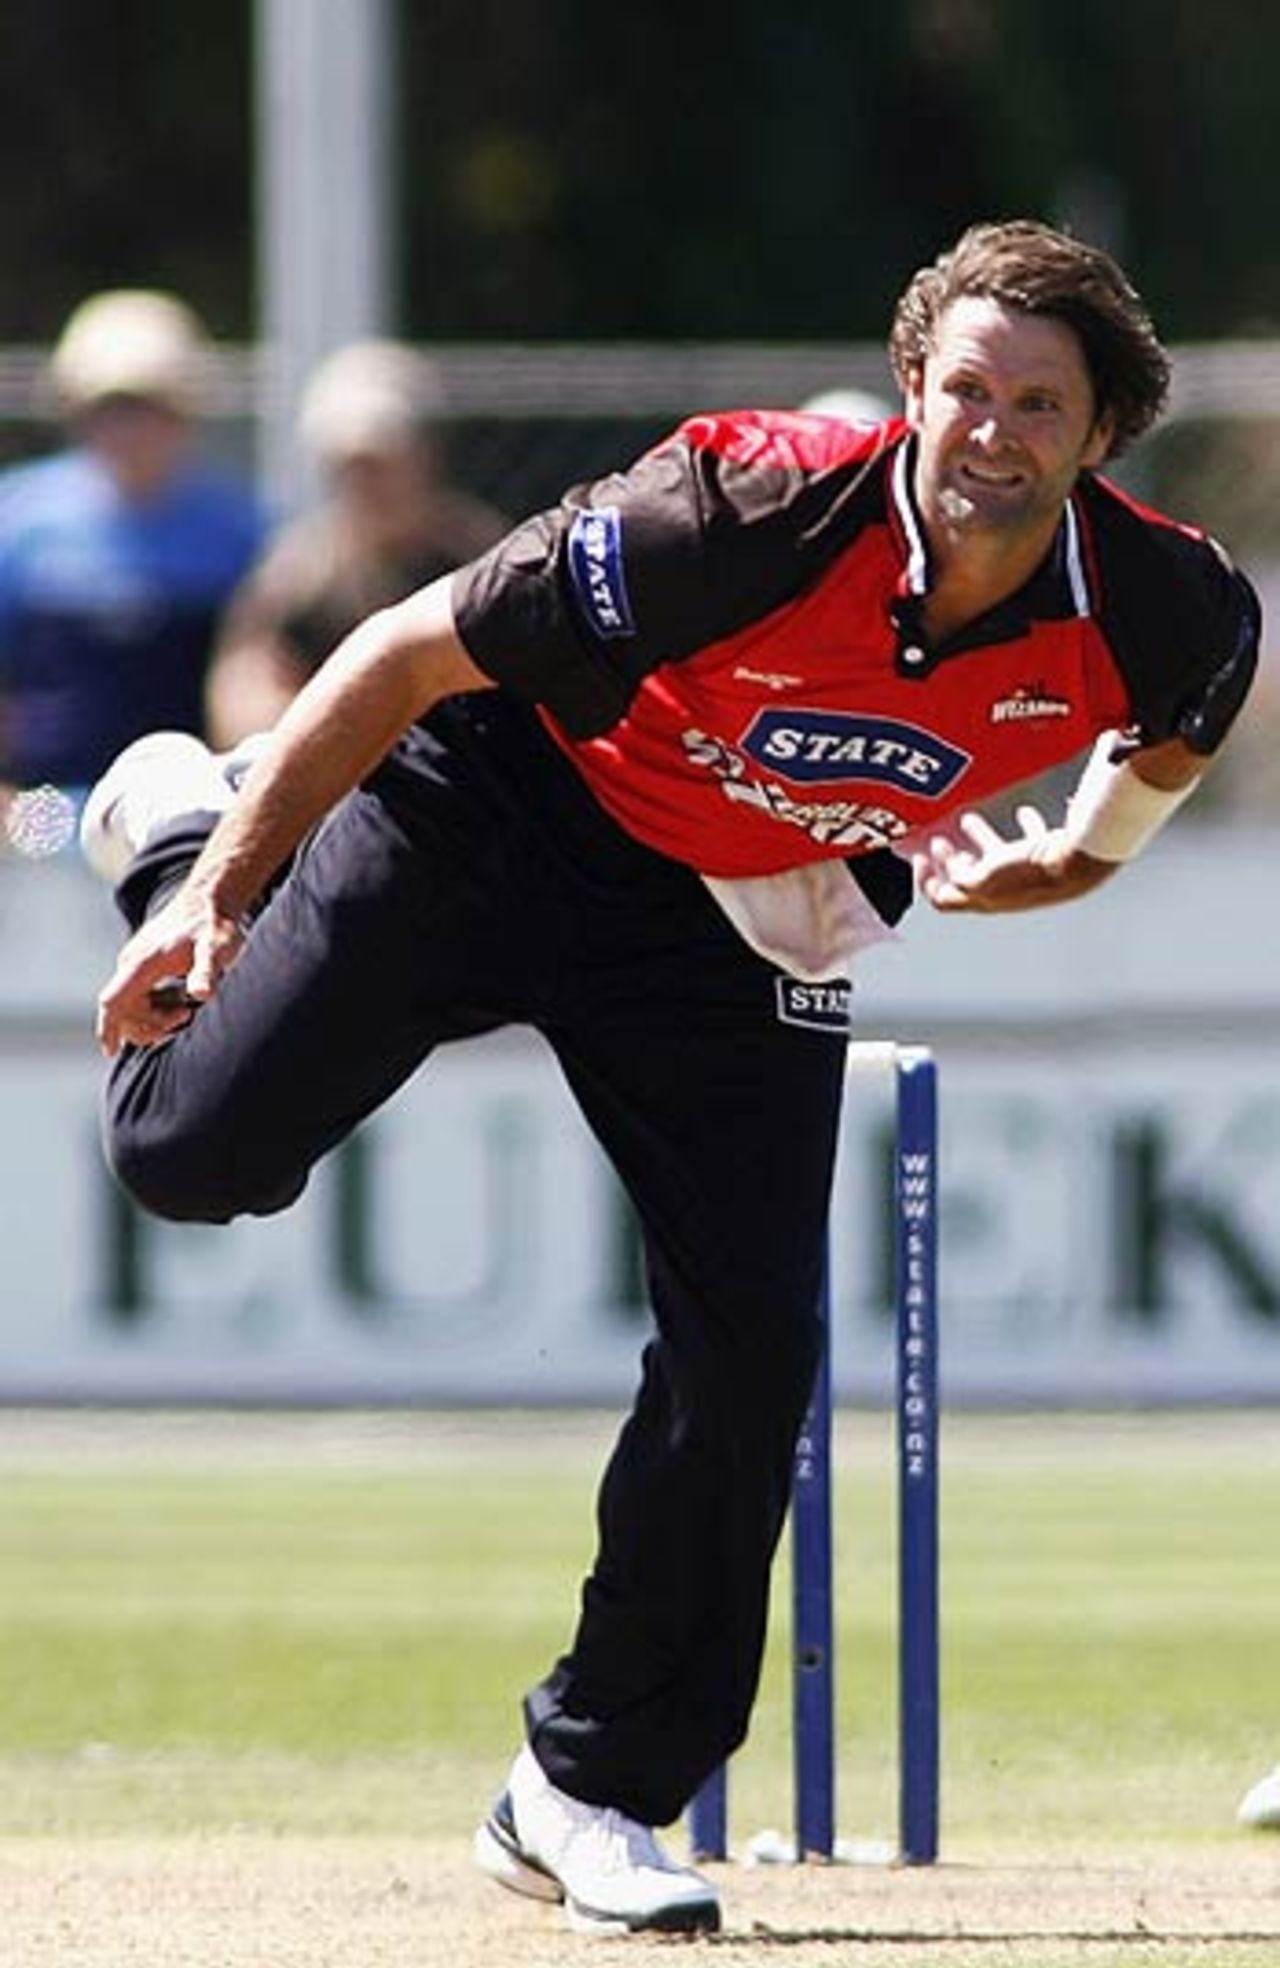 Chris Cairns turned in a fine allround performance to guide Canterbury to the State  Shield title, Canterbury v Central Districts, State Shield final, Christchurch, February 12 2006